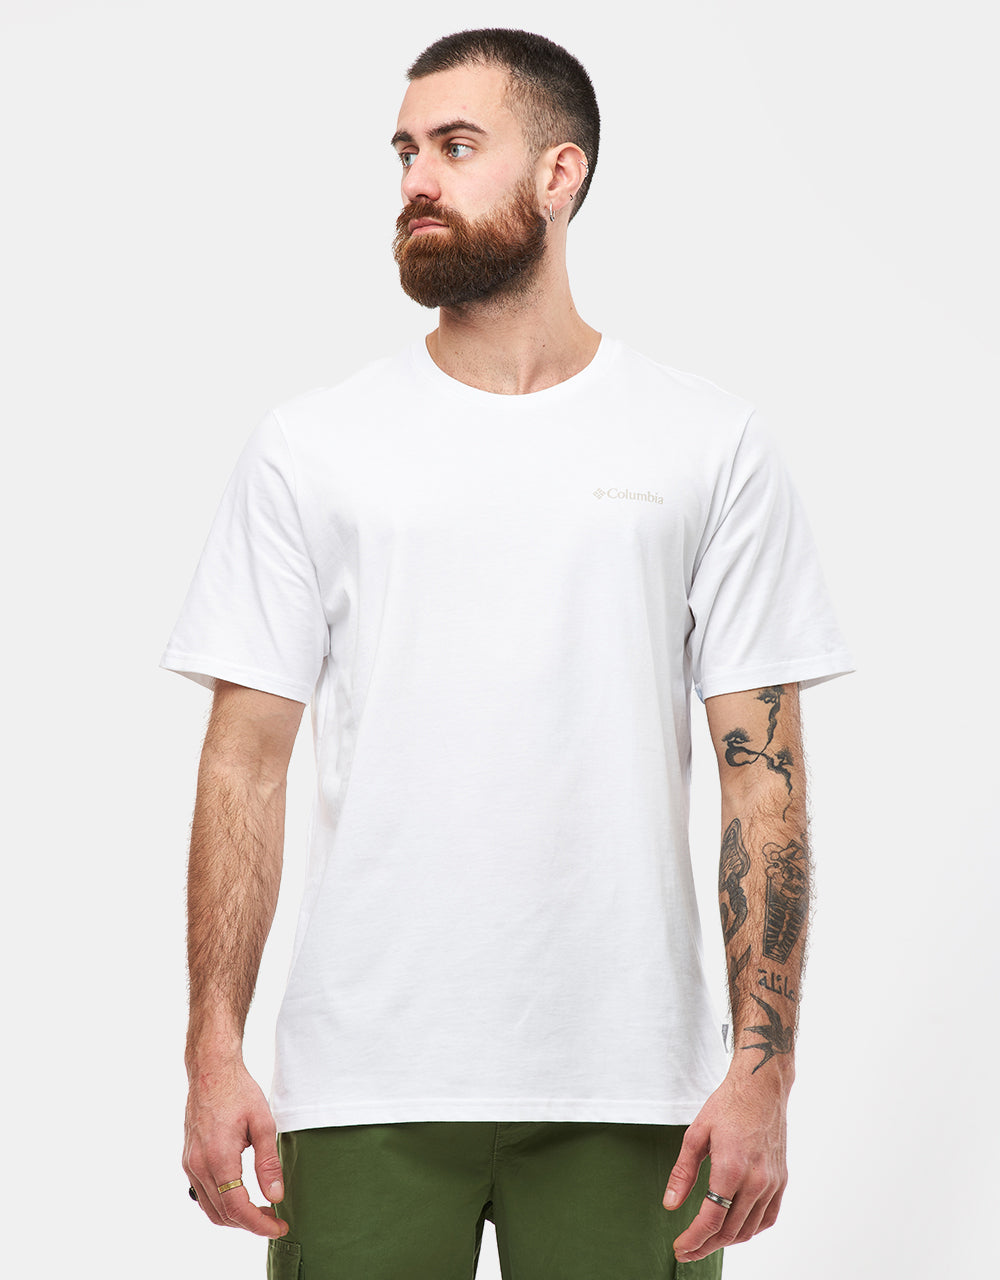 Columbia Explorers Canyon™ Back T-Shirt - White/Epicamp Graphic